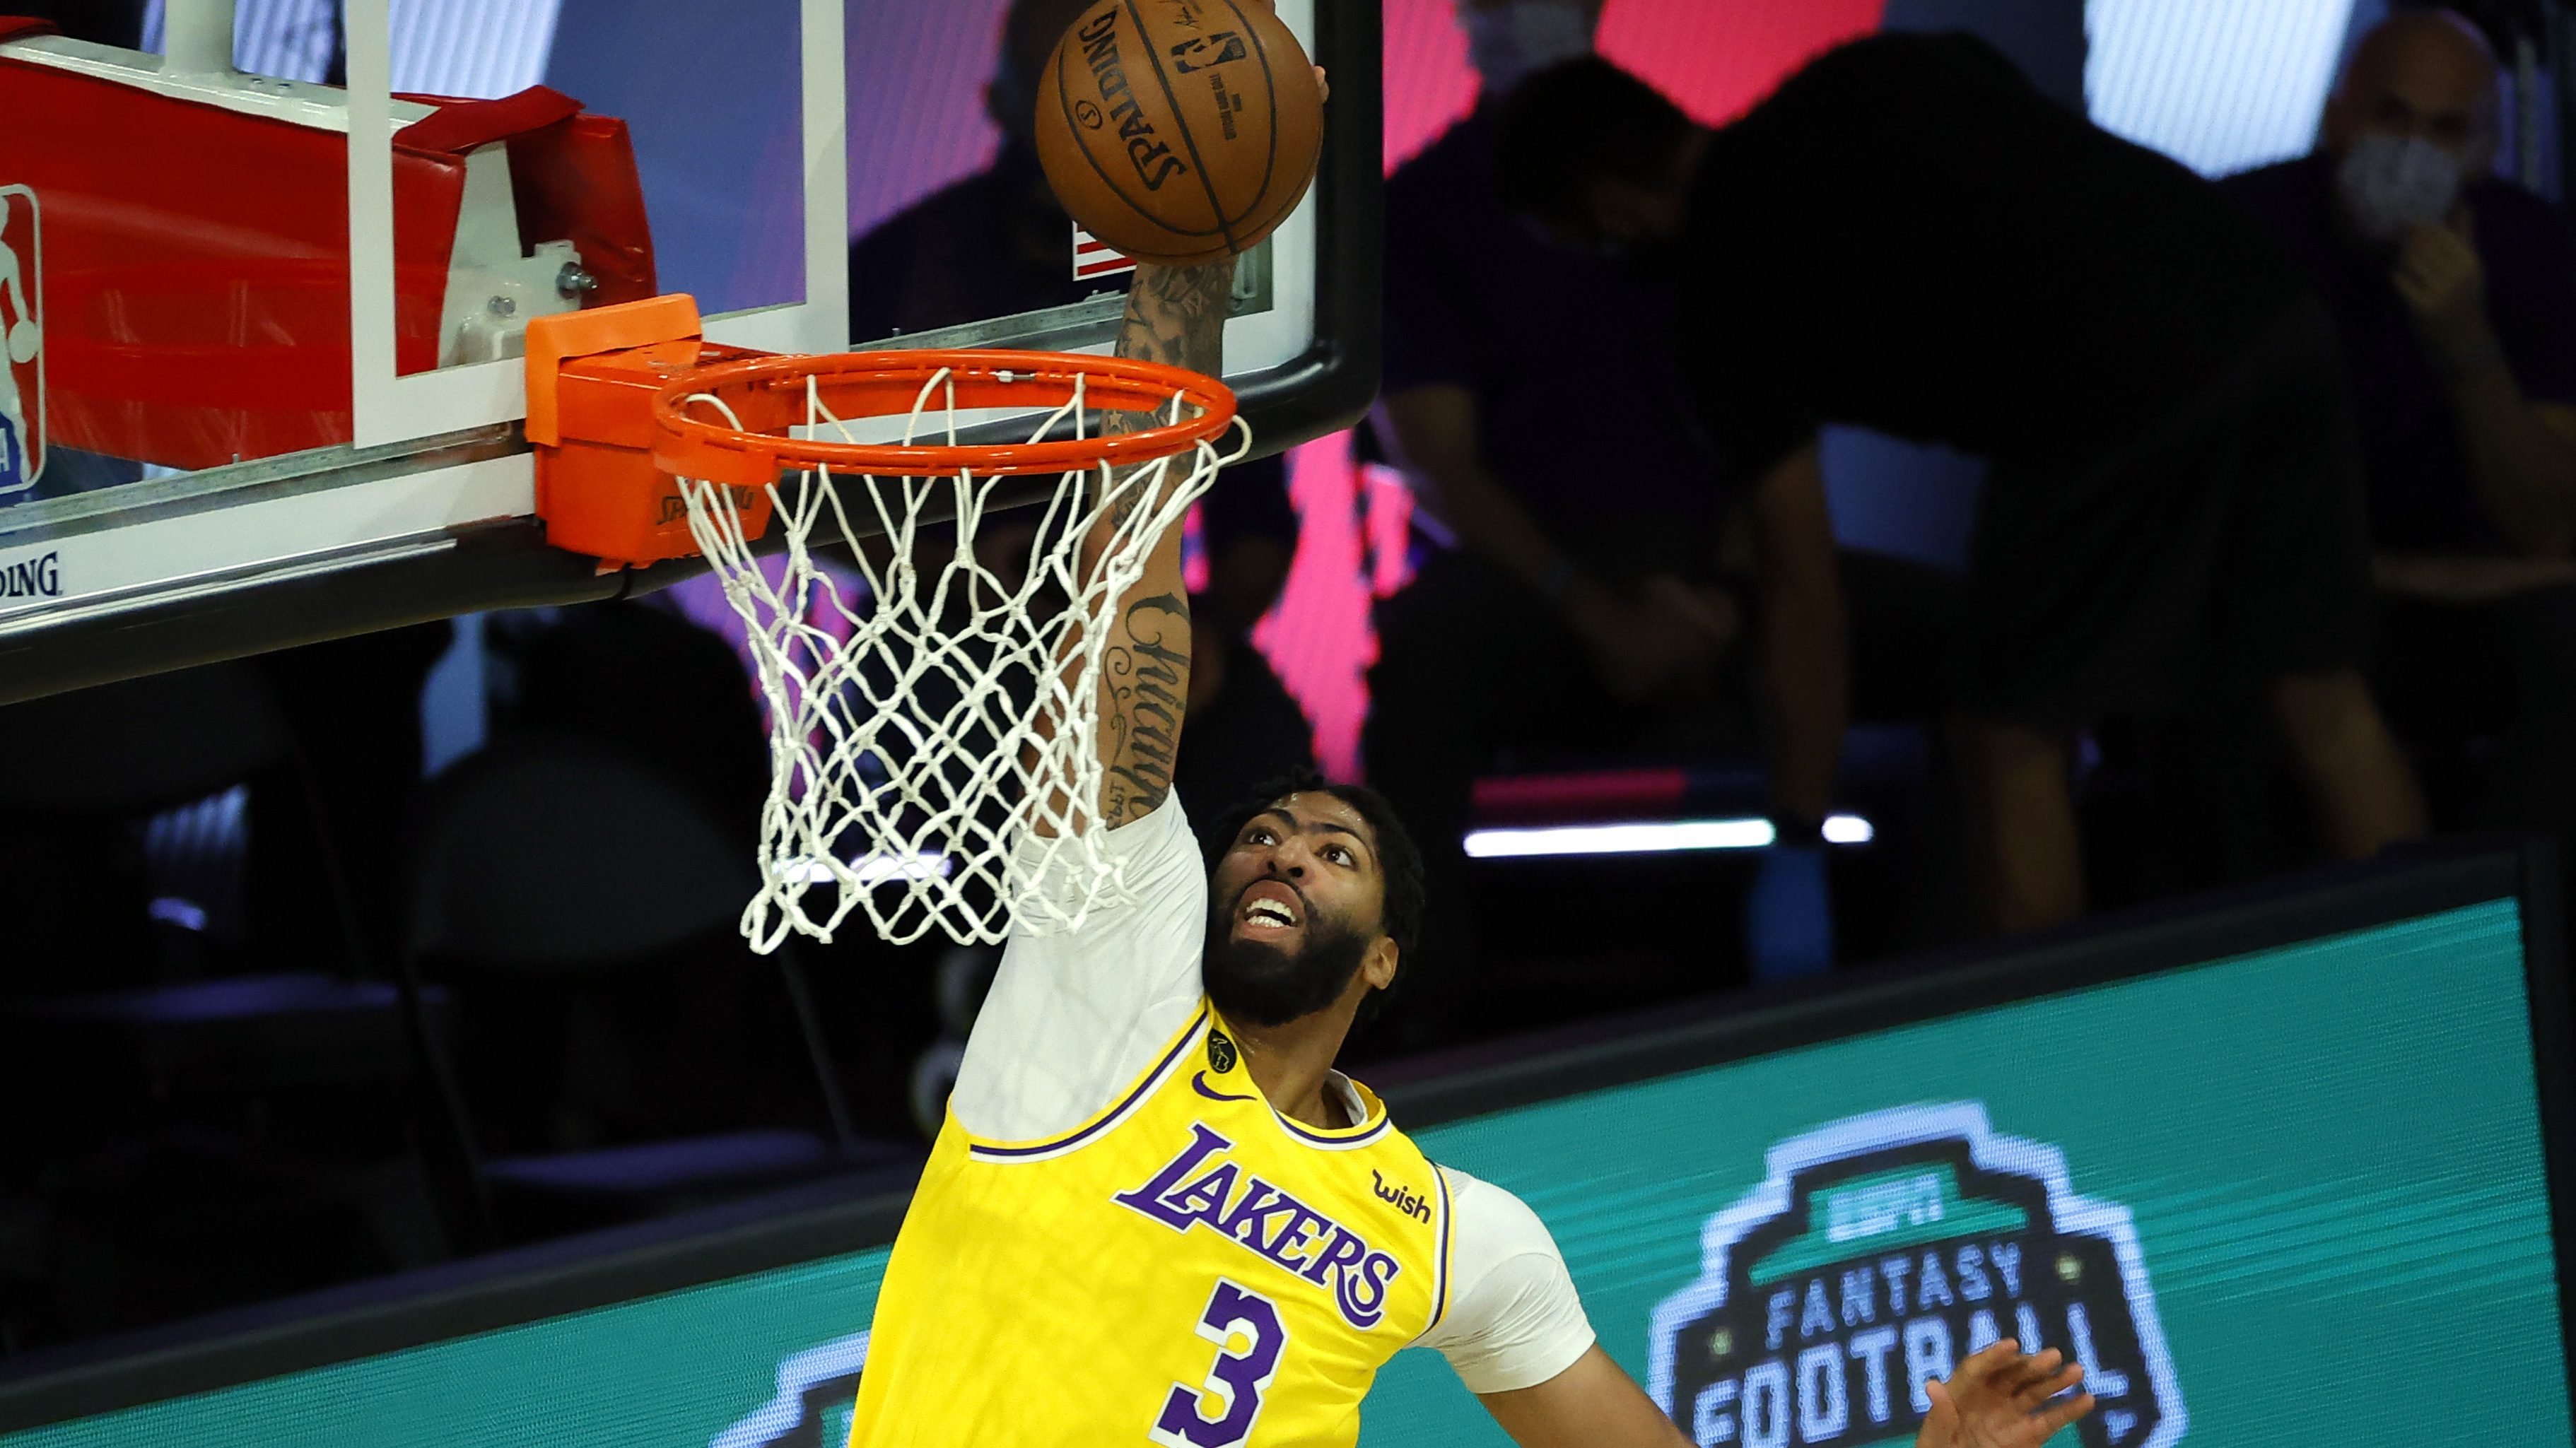 Lakers vs Pacers Live Stream How to Watch Online Free